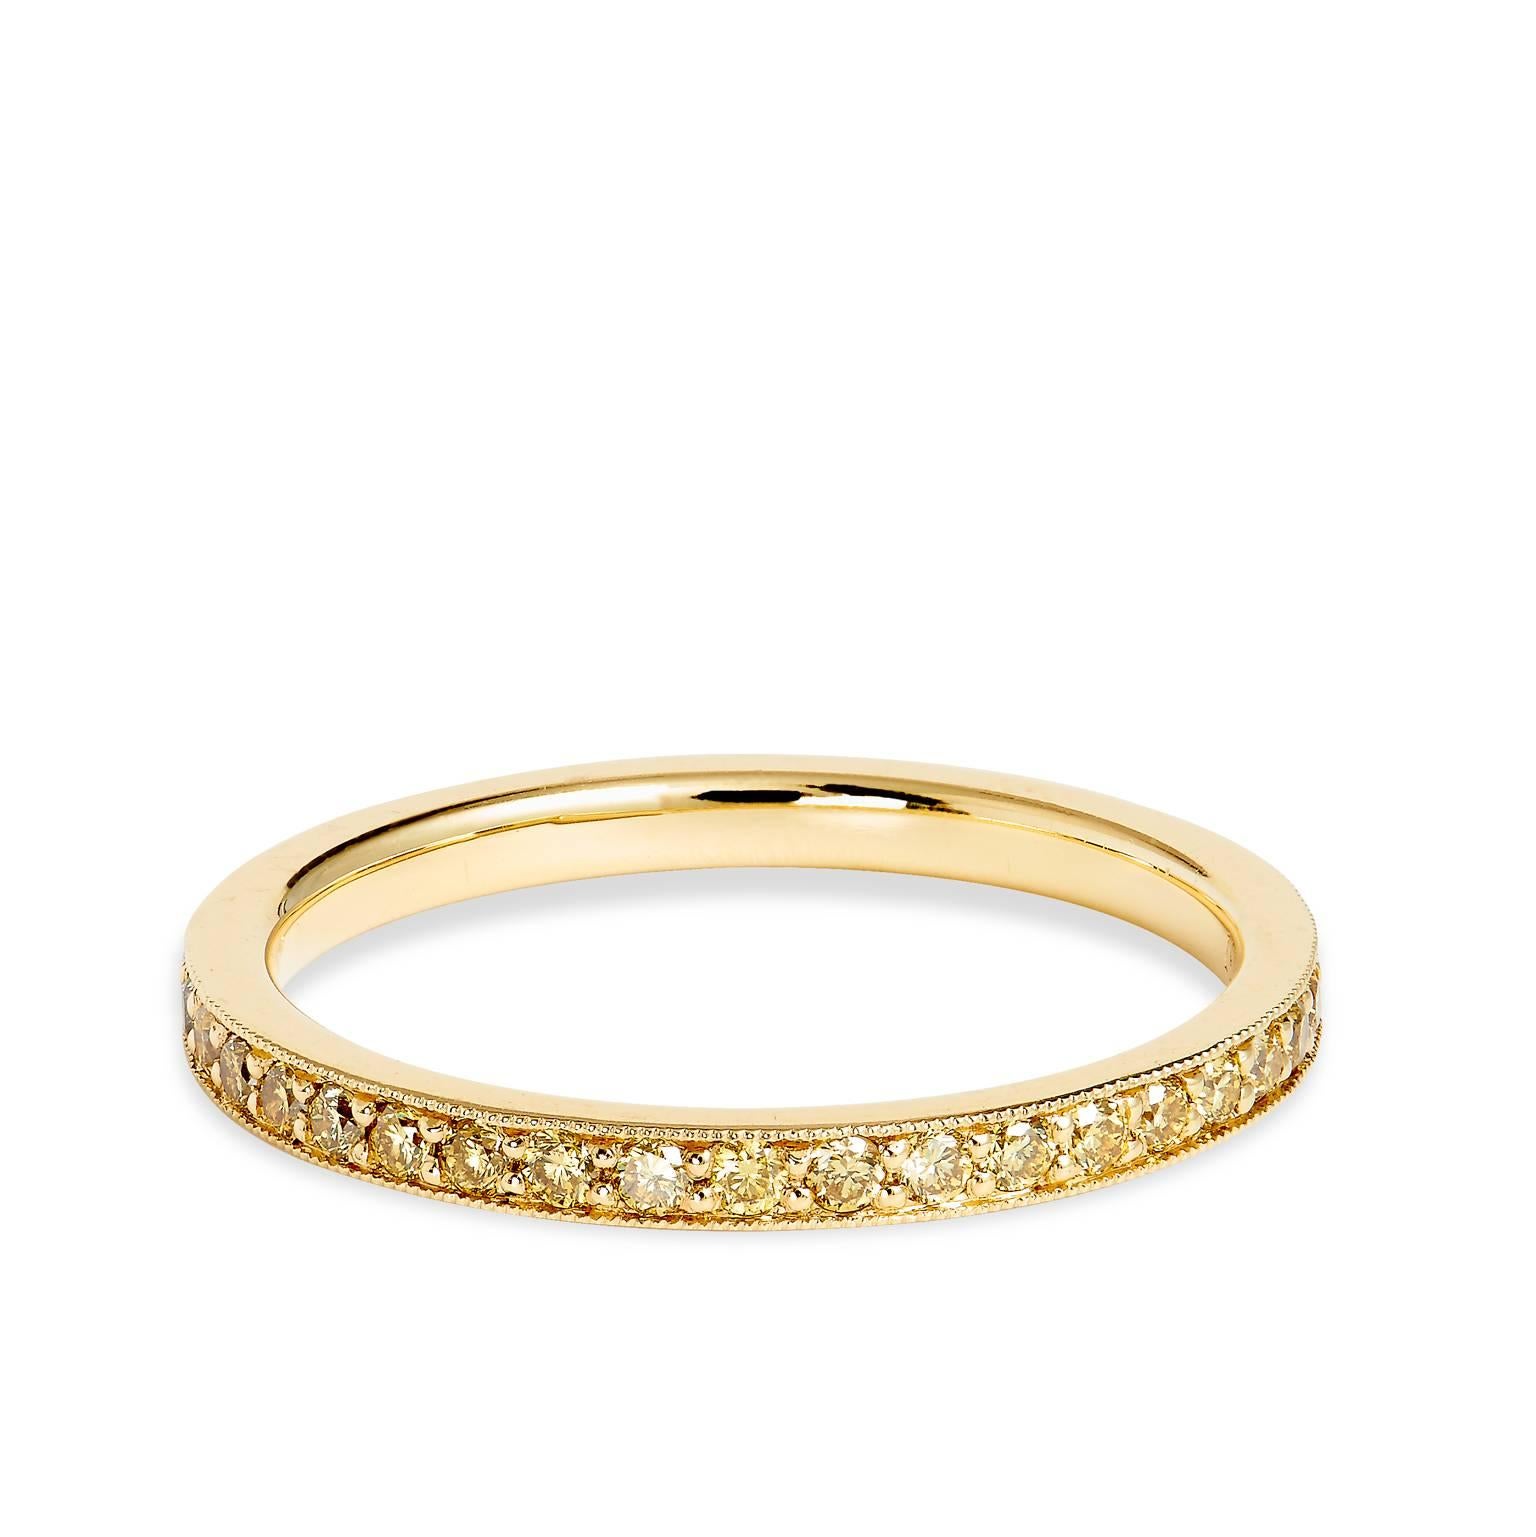 .50 carat Yellow Diamond Eternity Band Ring set in 18kt Yellow Gold Size 6

This beautiful eternity band is crafted in 18 karat yellow gold with .50 carats of yellow diamonds. It displays beautiful mil-grain detail upon the edges of the band. It